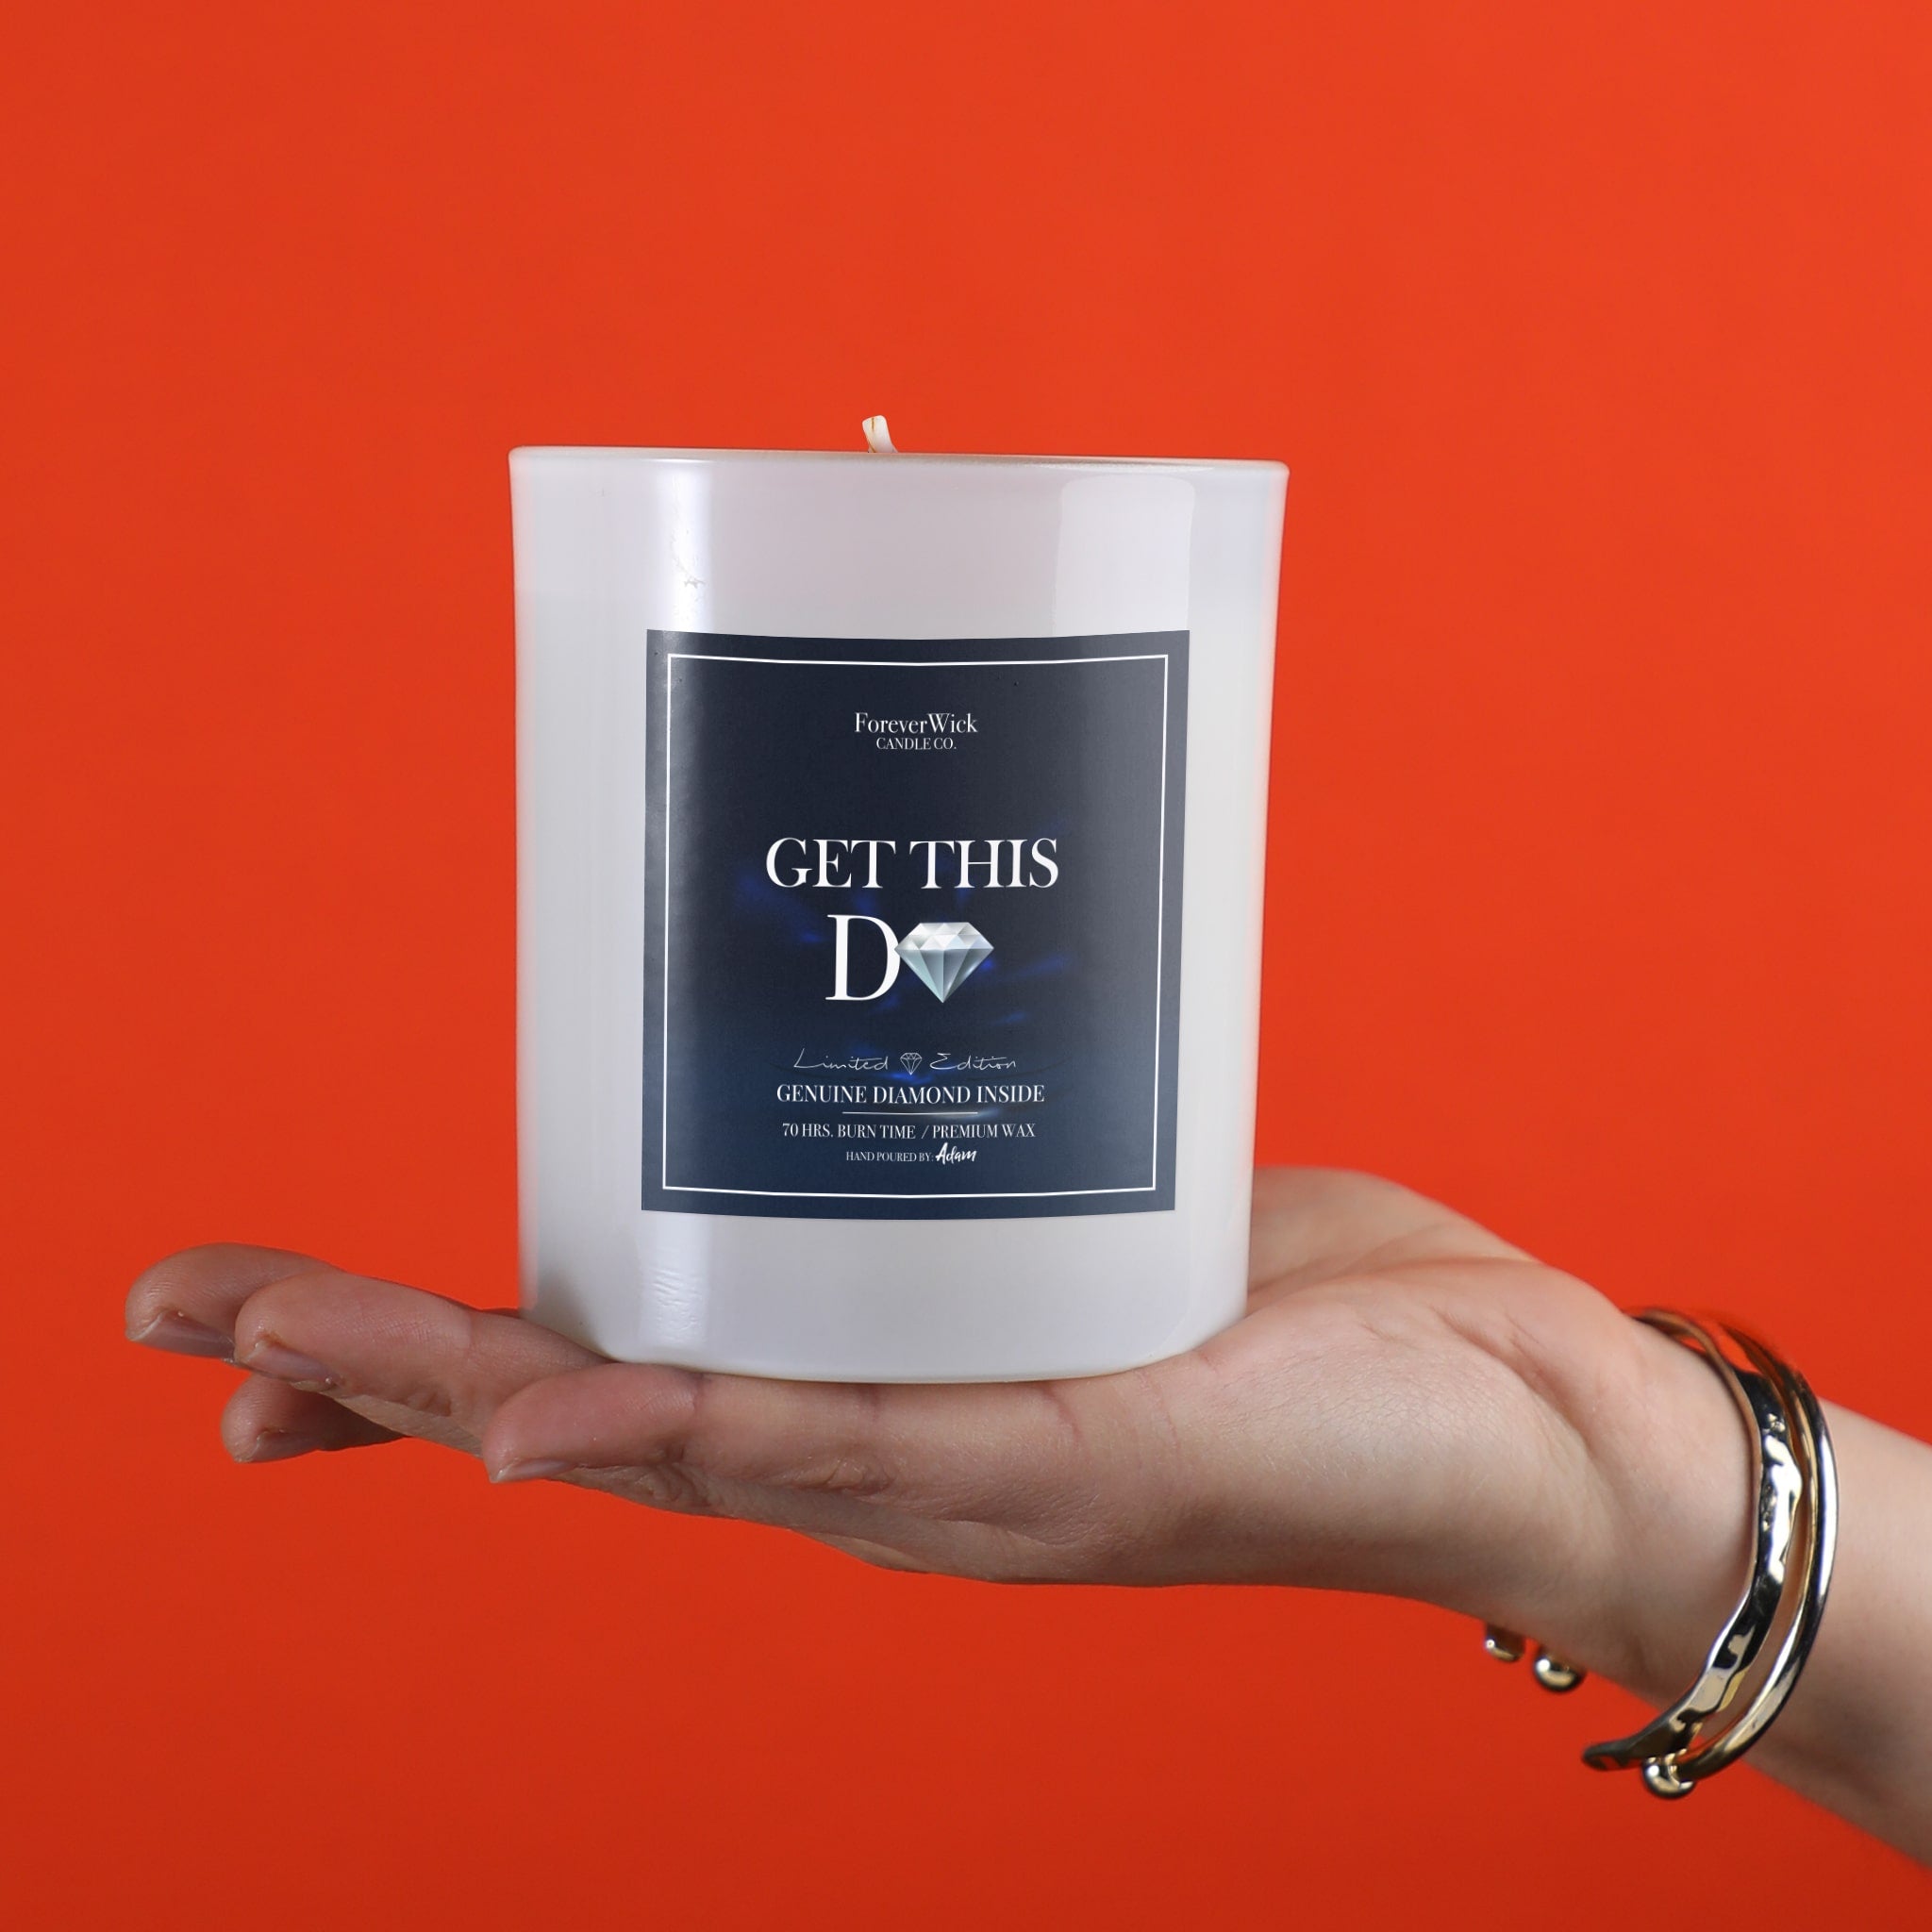 Get This D Diamond Candle